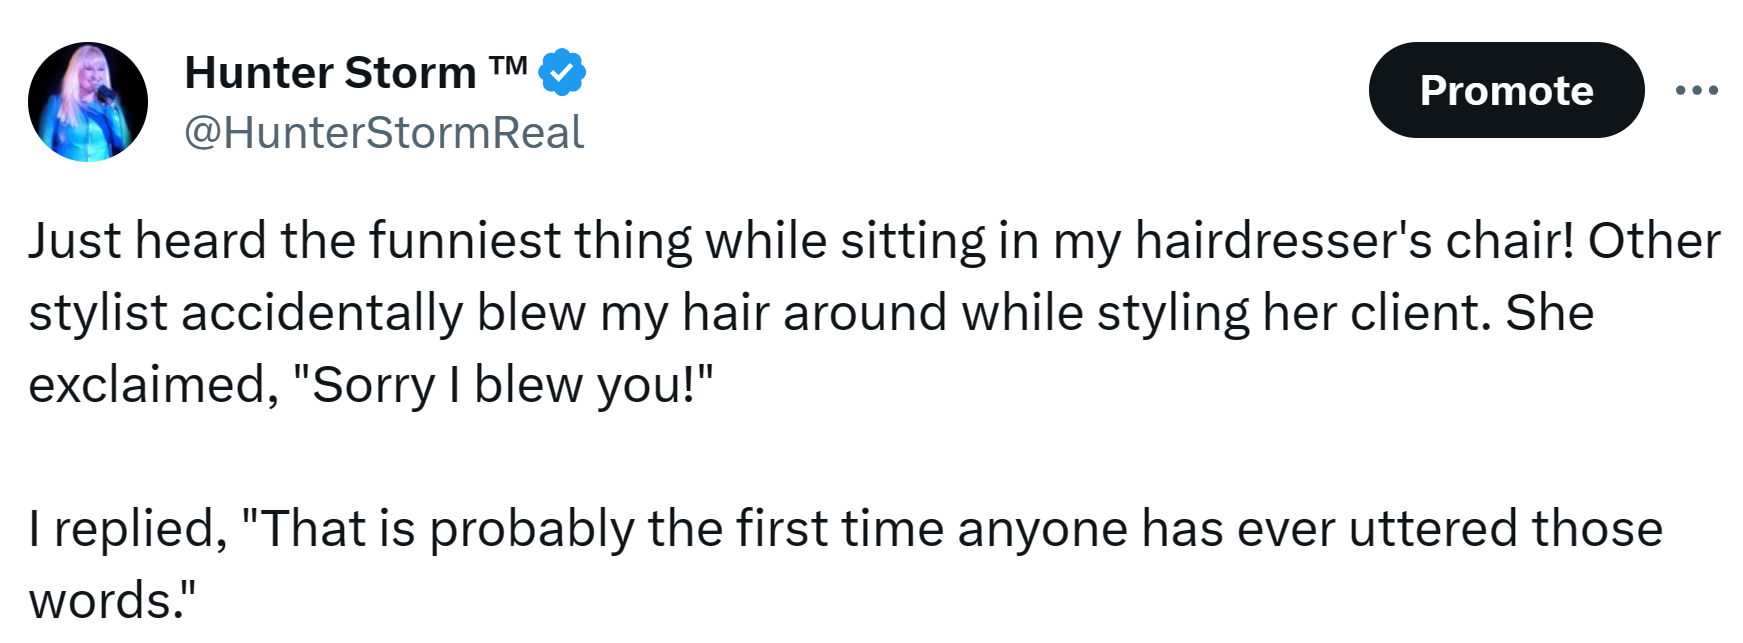 Hunter Storm Humor | "Just heard the funniest thing while sitting in my hairdresser's chair! Other stylist accidentally blew my hair around while styling her client. She exclaimed, 'Sorry I blew you!'"